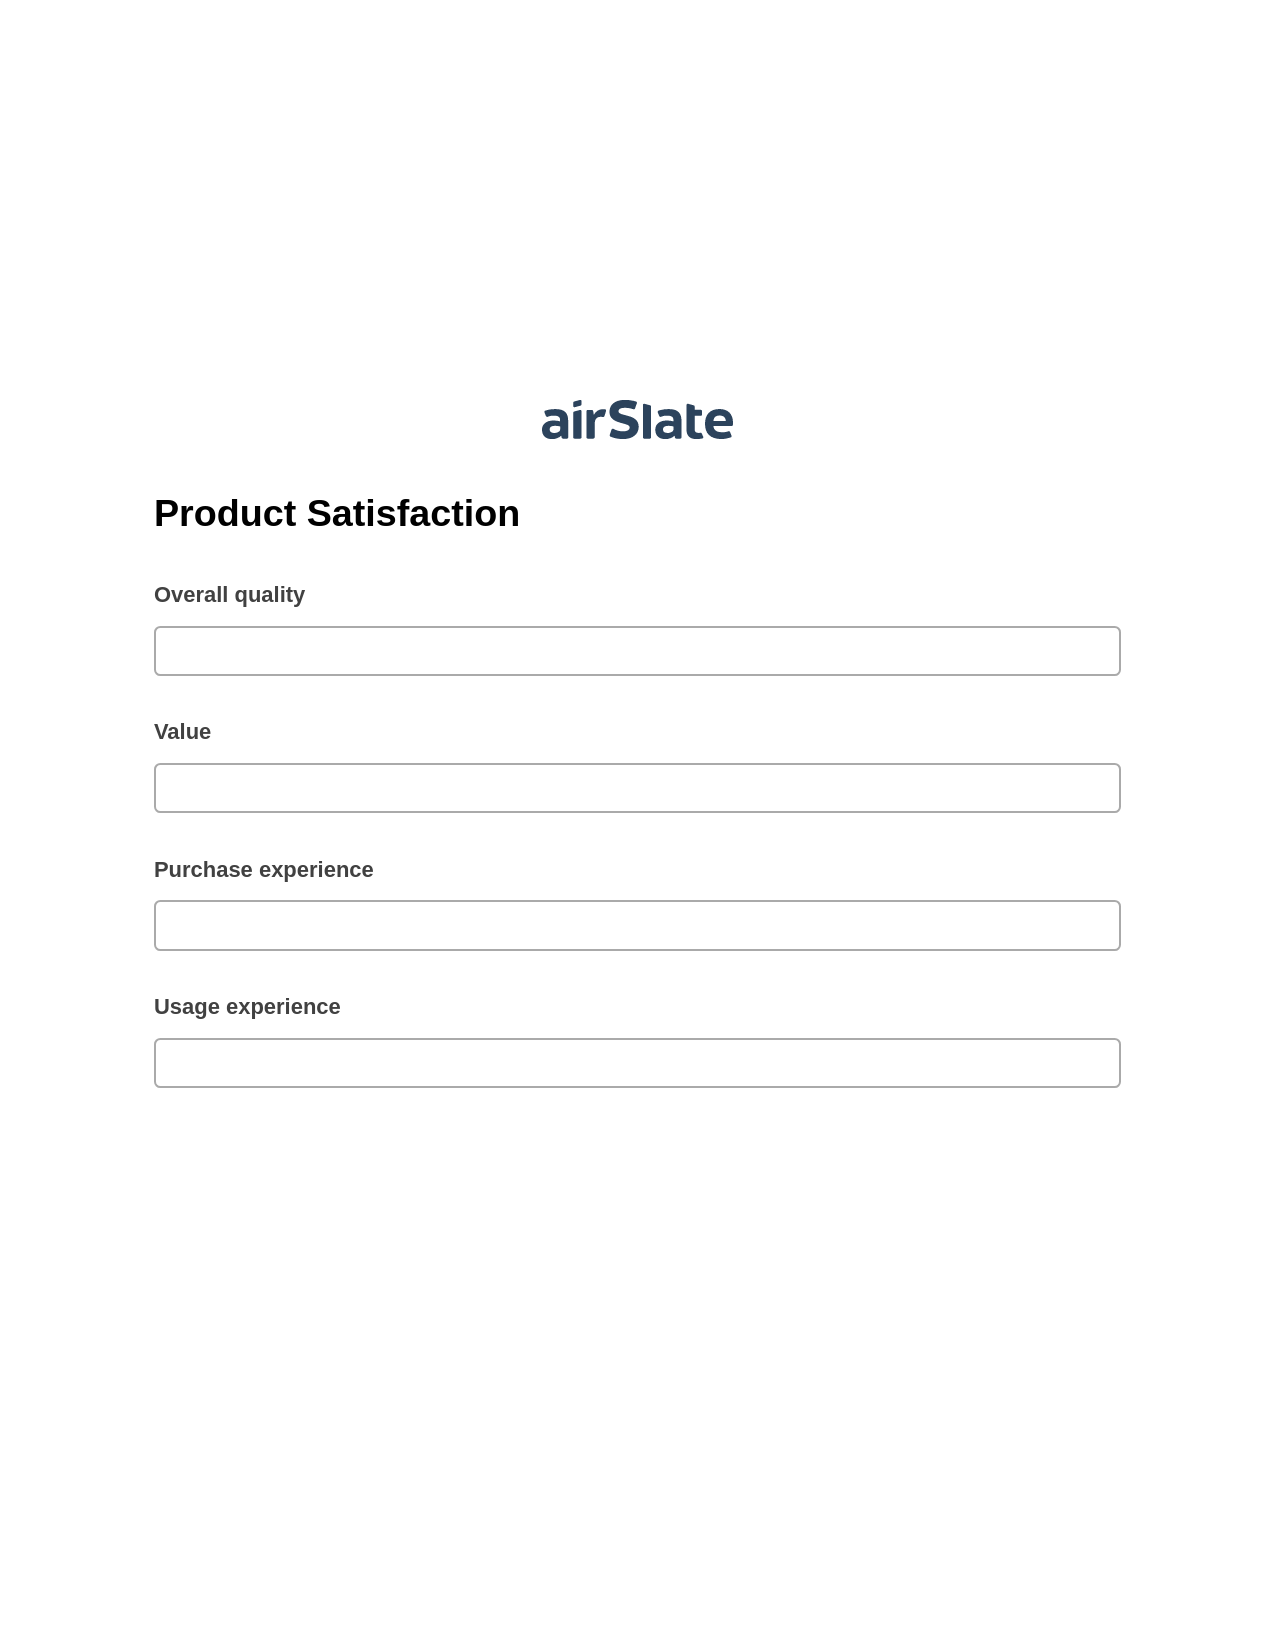 Product Satisfaction Pre-fill from Excel Spreadsheet Bot, Reminder Bot, Dropbox Bot